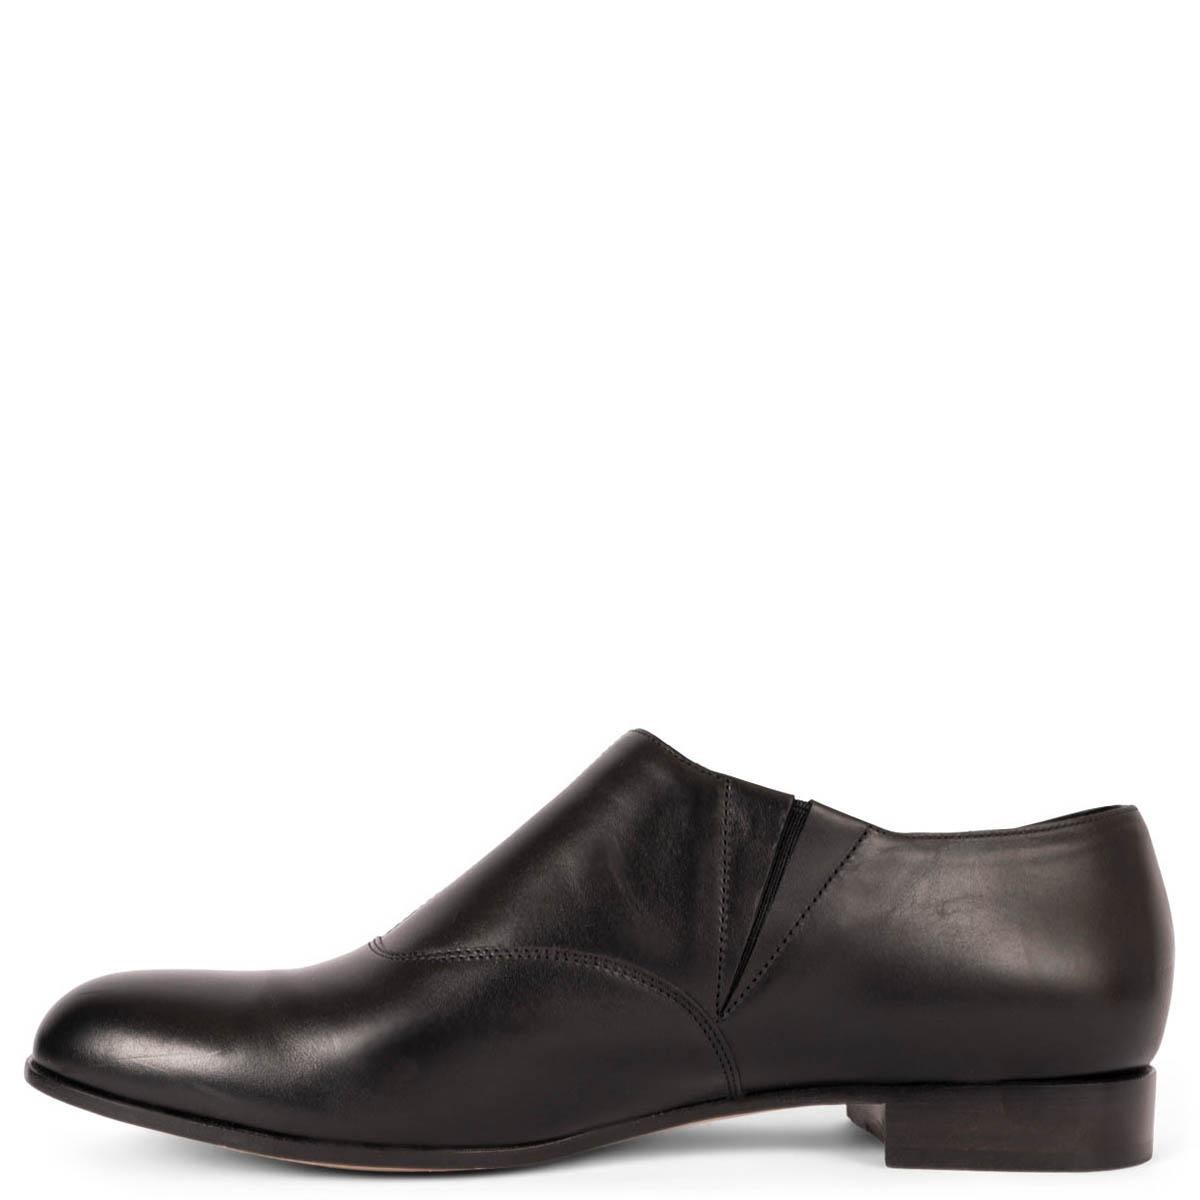 GIORGIO ARMANI black leather BUTTONED OXFORD Shoes 39 In Excellent Condition For Sale In Zürich, CH